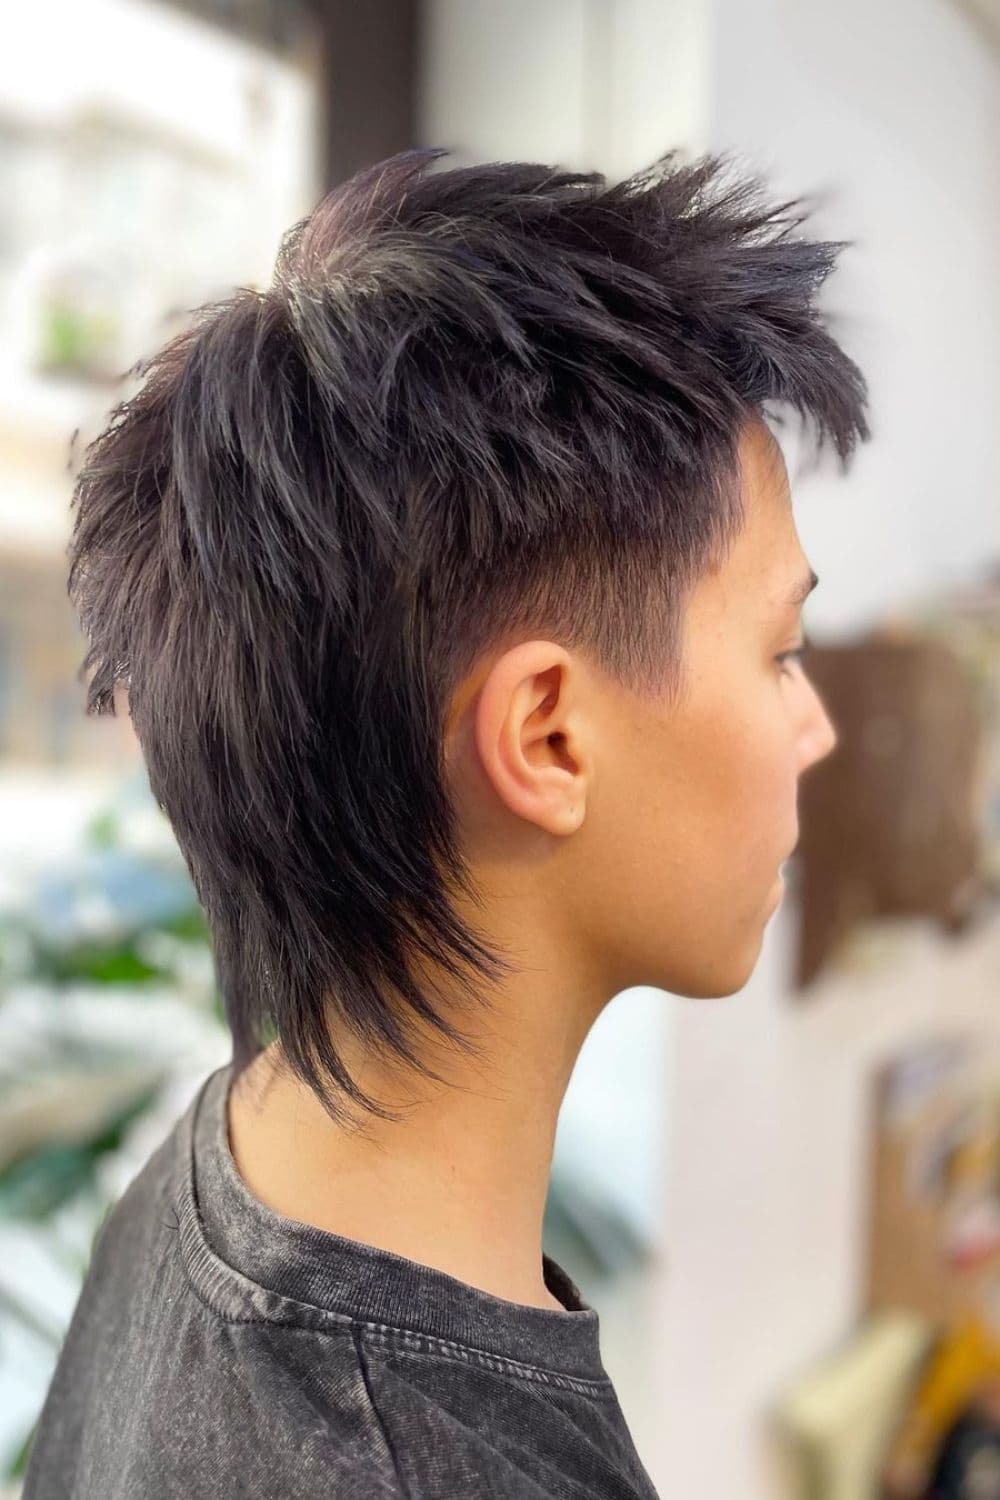 Side view of a man with mullet-style wolf cut.